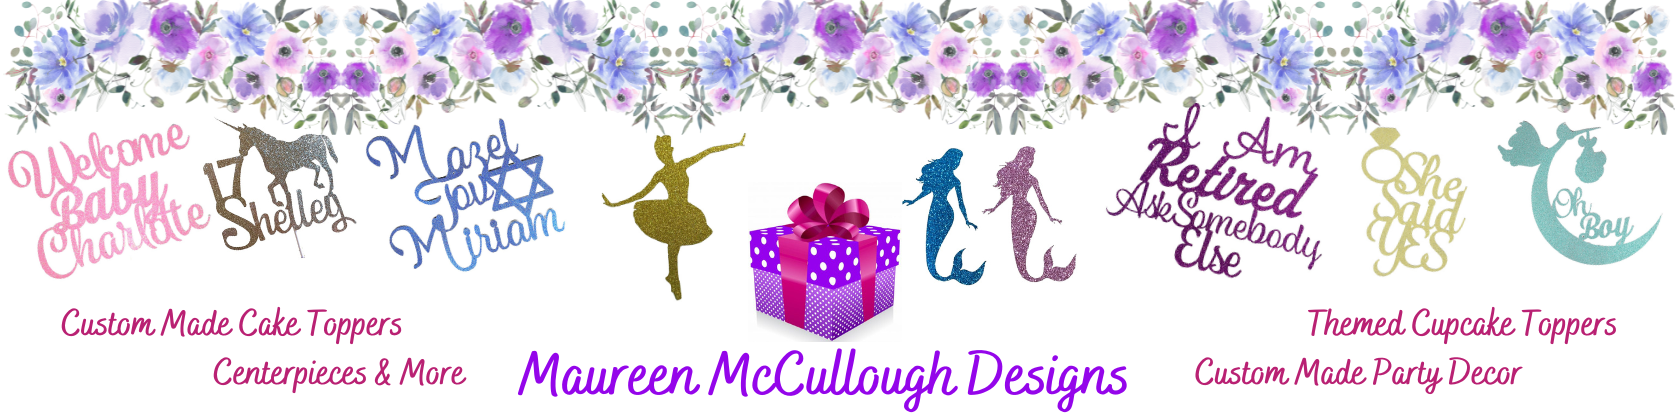 Maureen McCullough Designs Custom Made Cake Toppers Cupcake Toppers Party Decor Centerpieces and More